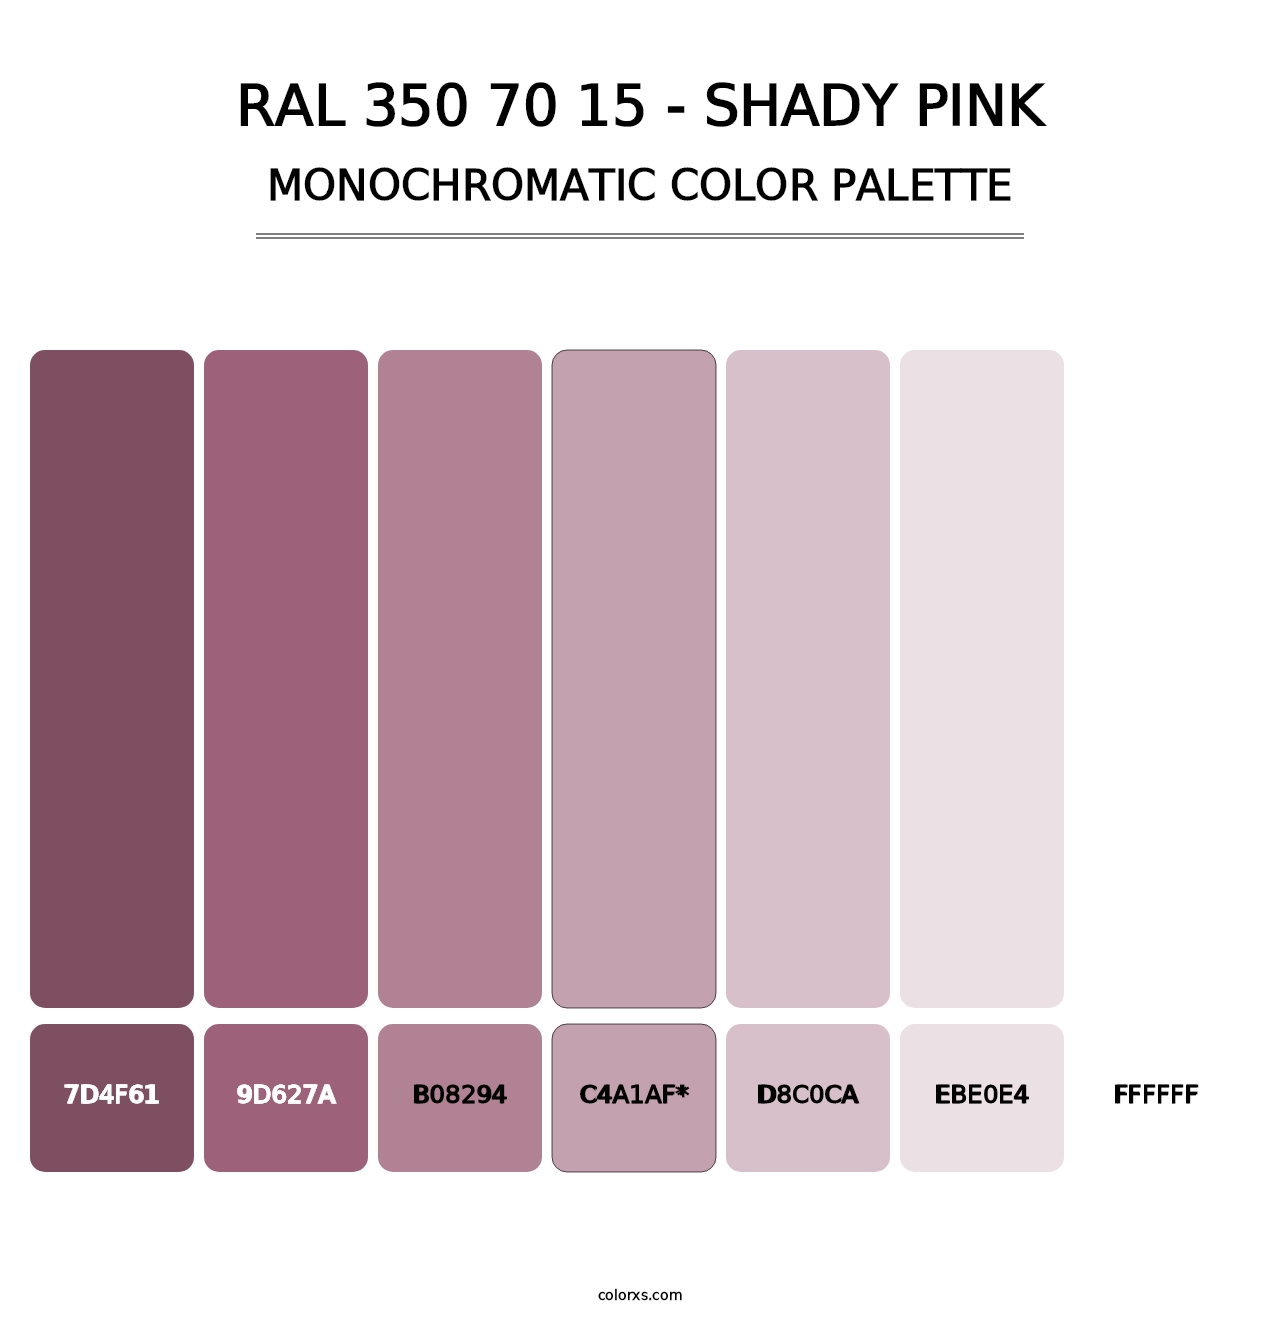 RAL 350 70 15 - Shady Pink - Monochromatic Color Palette